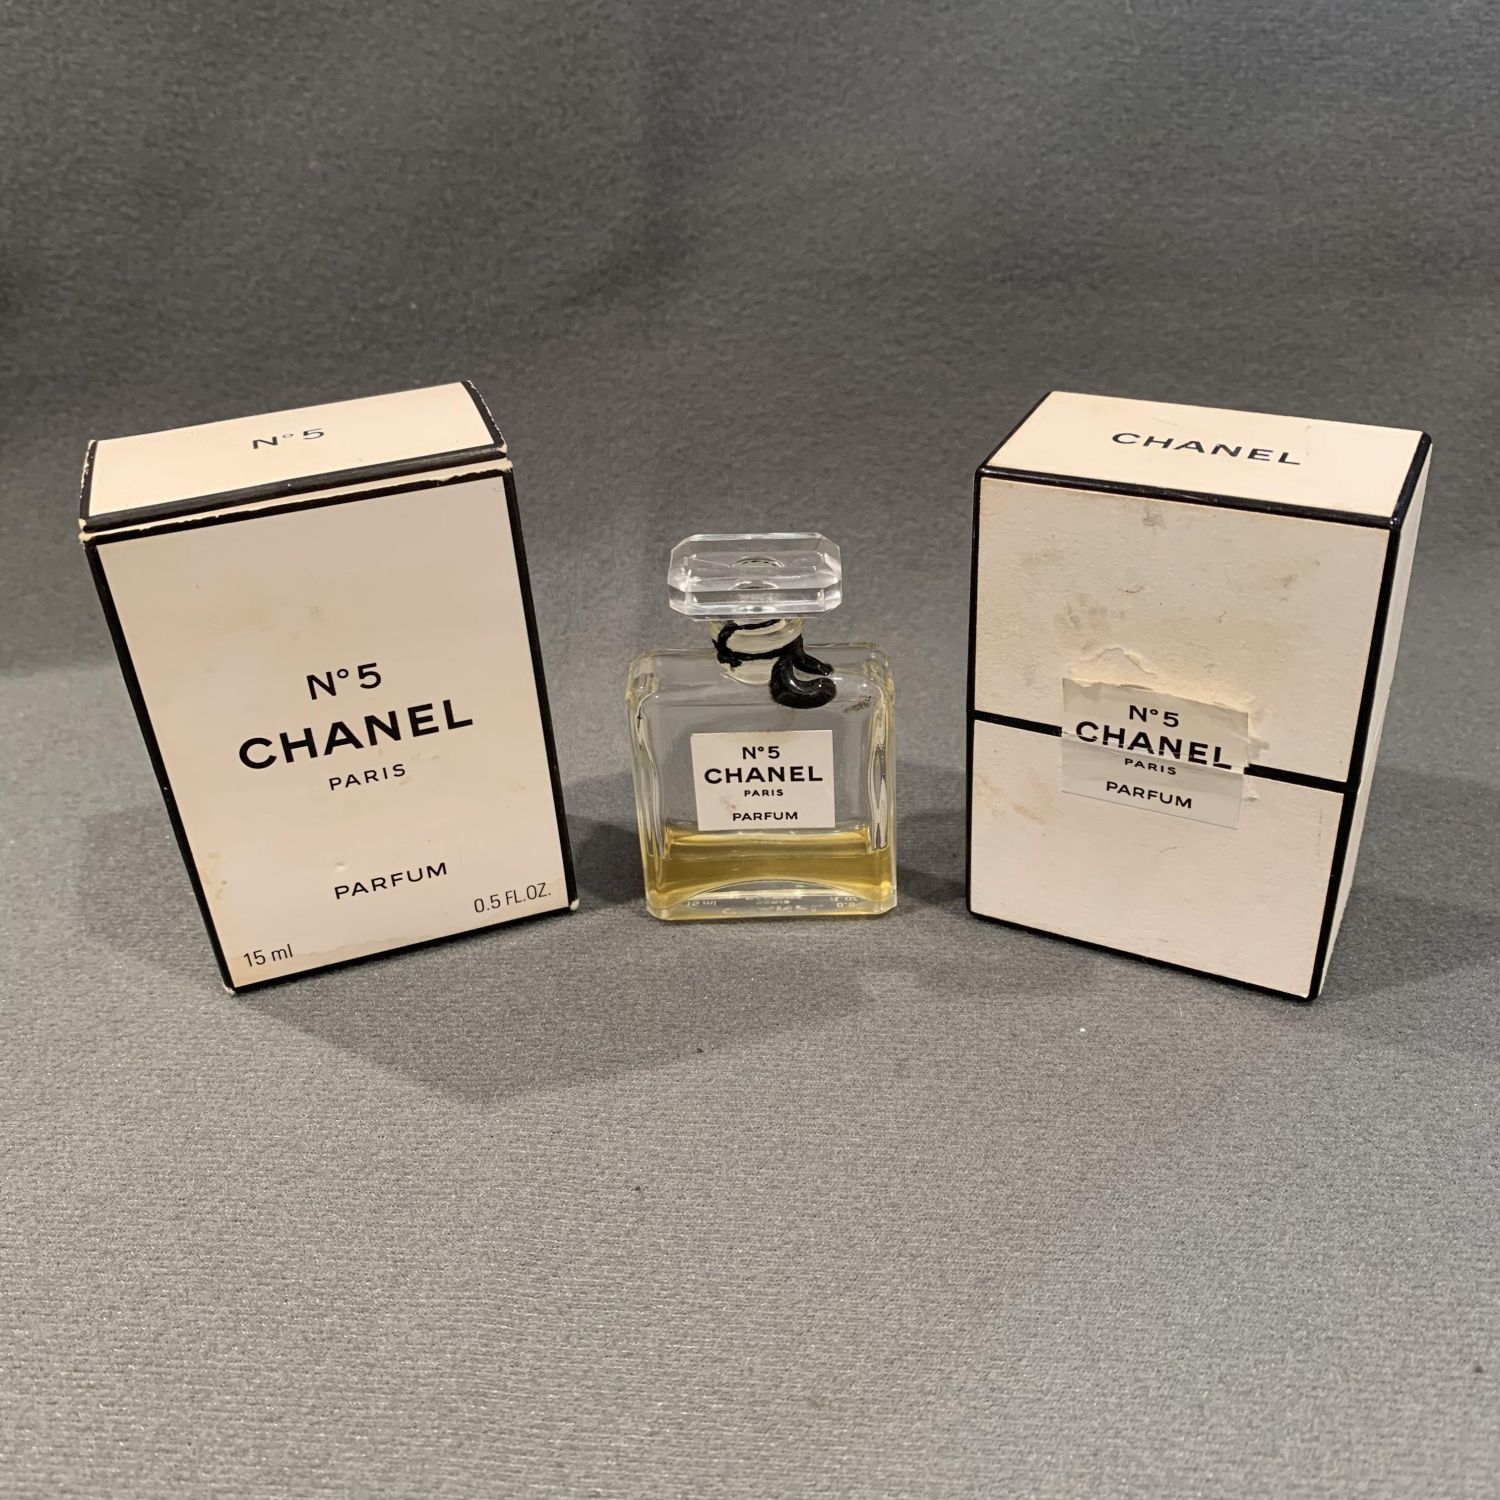 Chanel No5 15ml Perfume Bottle - Glass - Hemswell Antique Centres